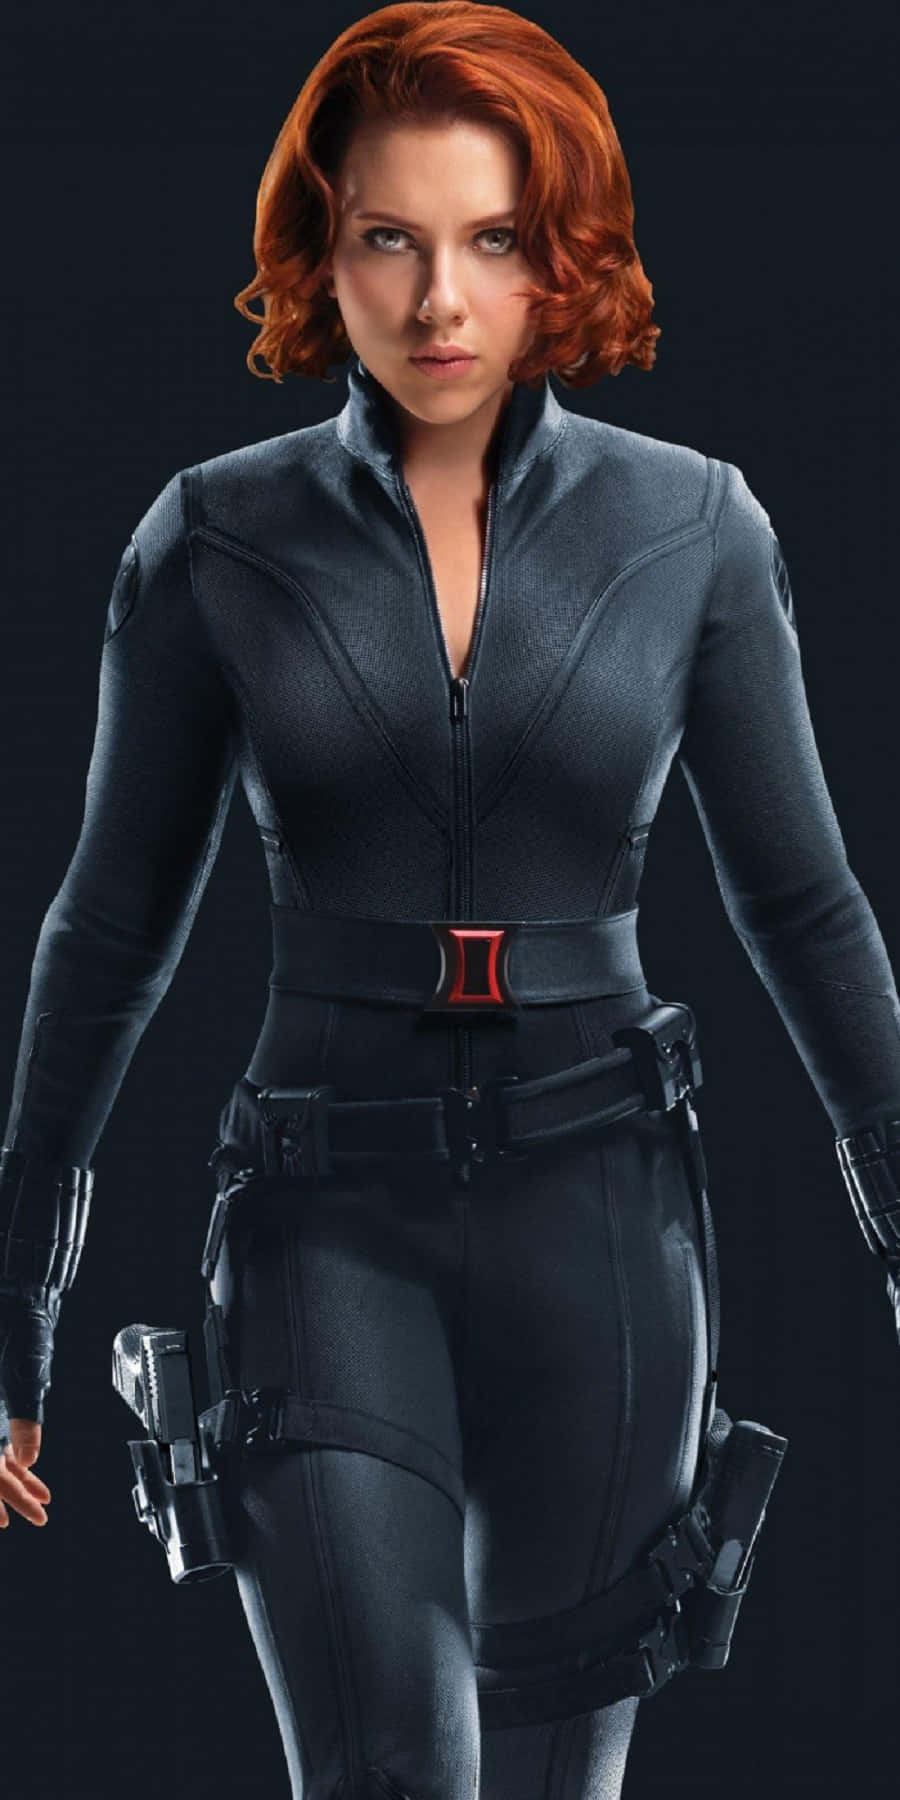 Black Widow - Ready for Action!